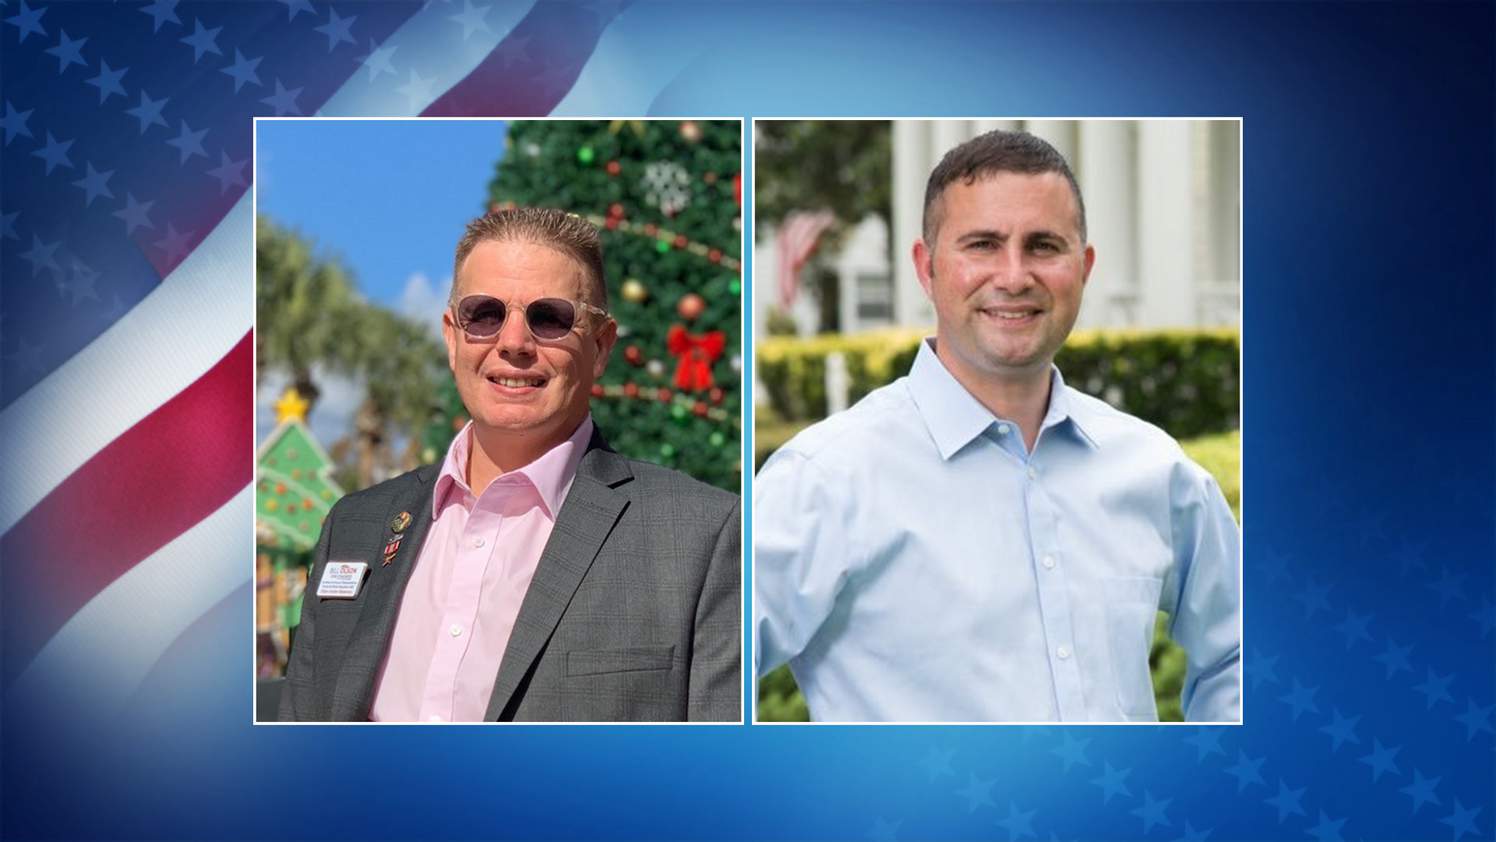 Meet the candidates: Here’s who’s running for US House District 9